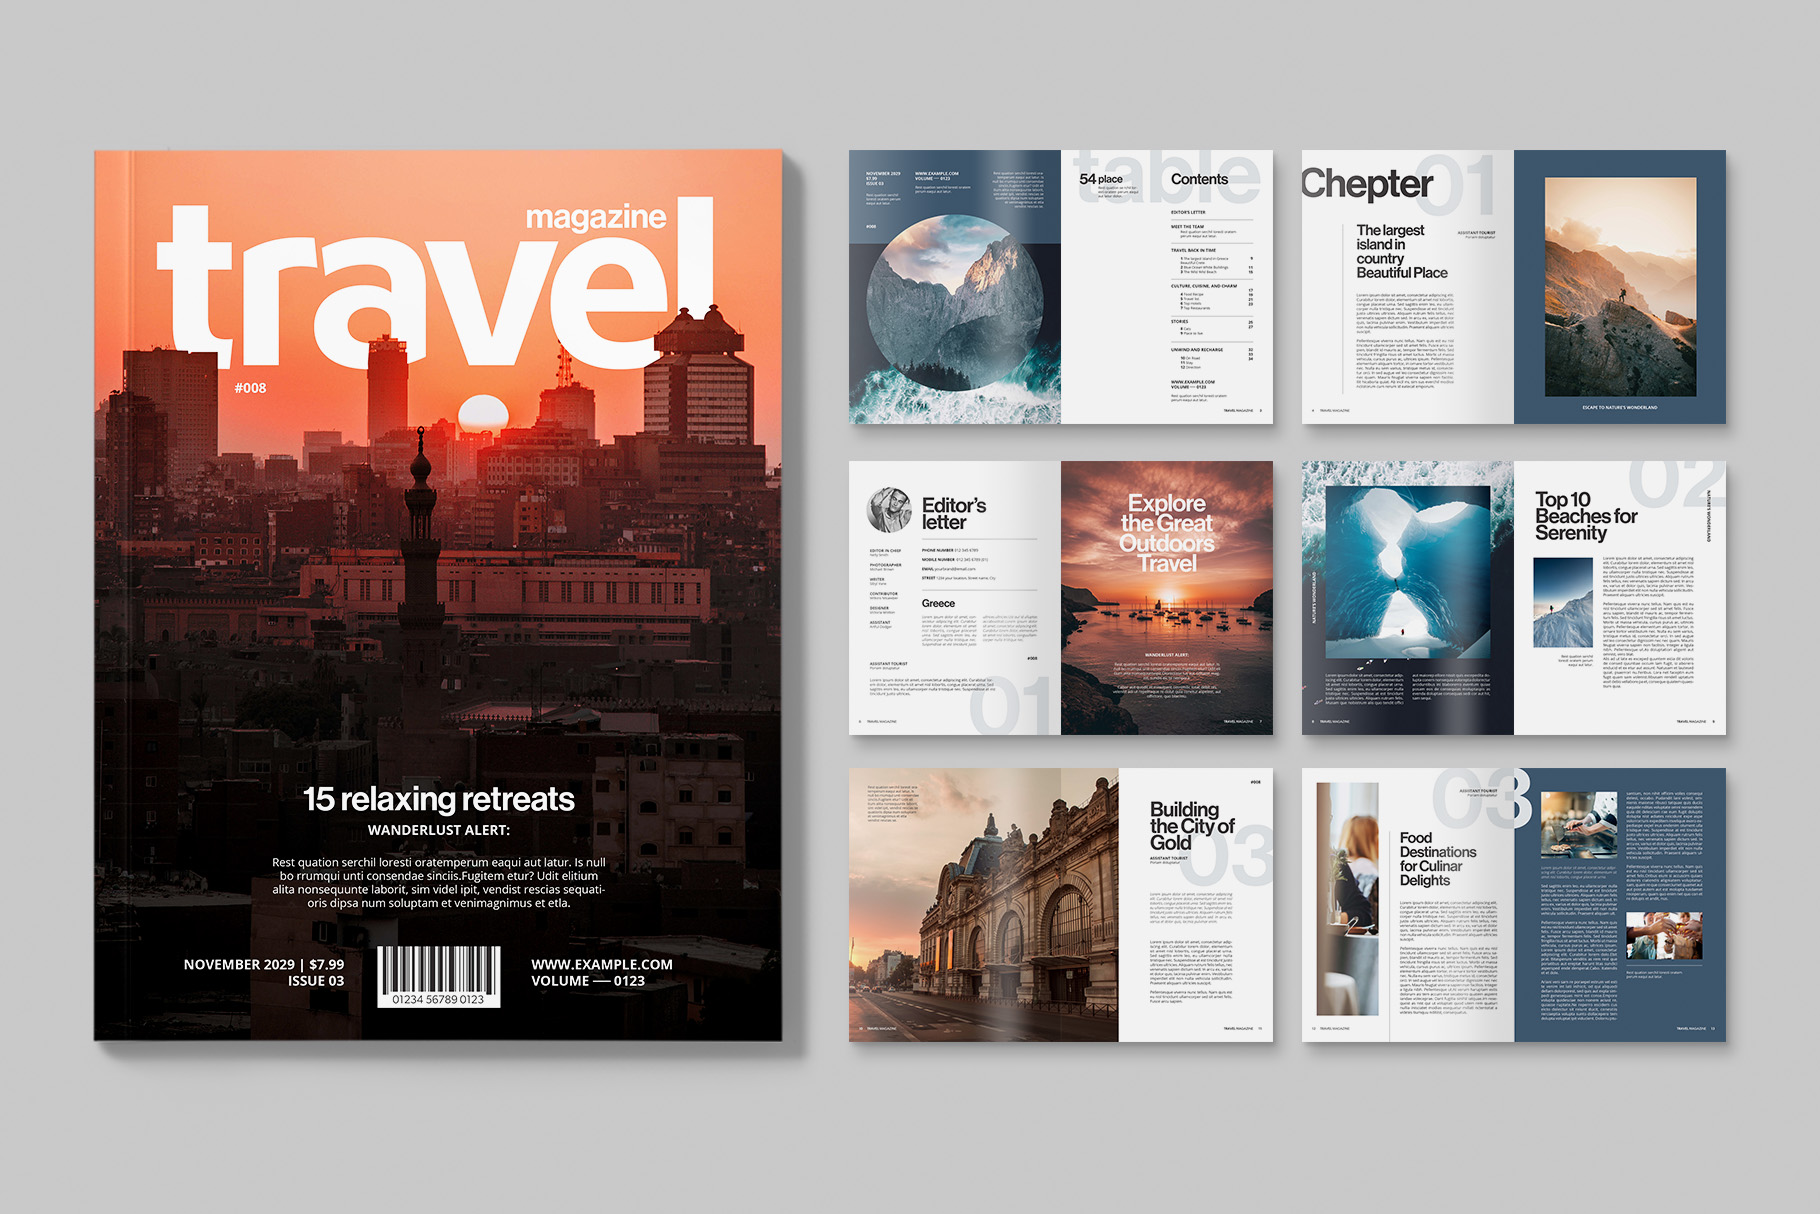 Travel Magazine Template in InDesign INDD format